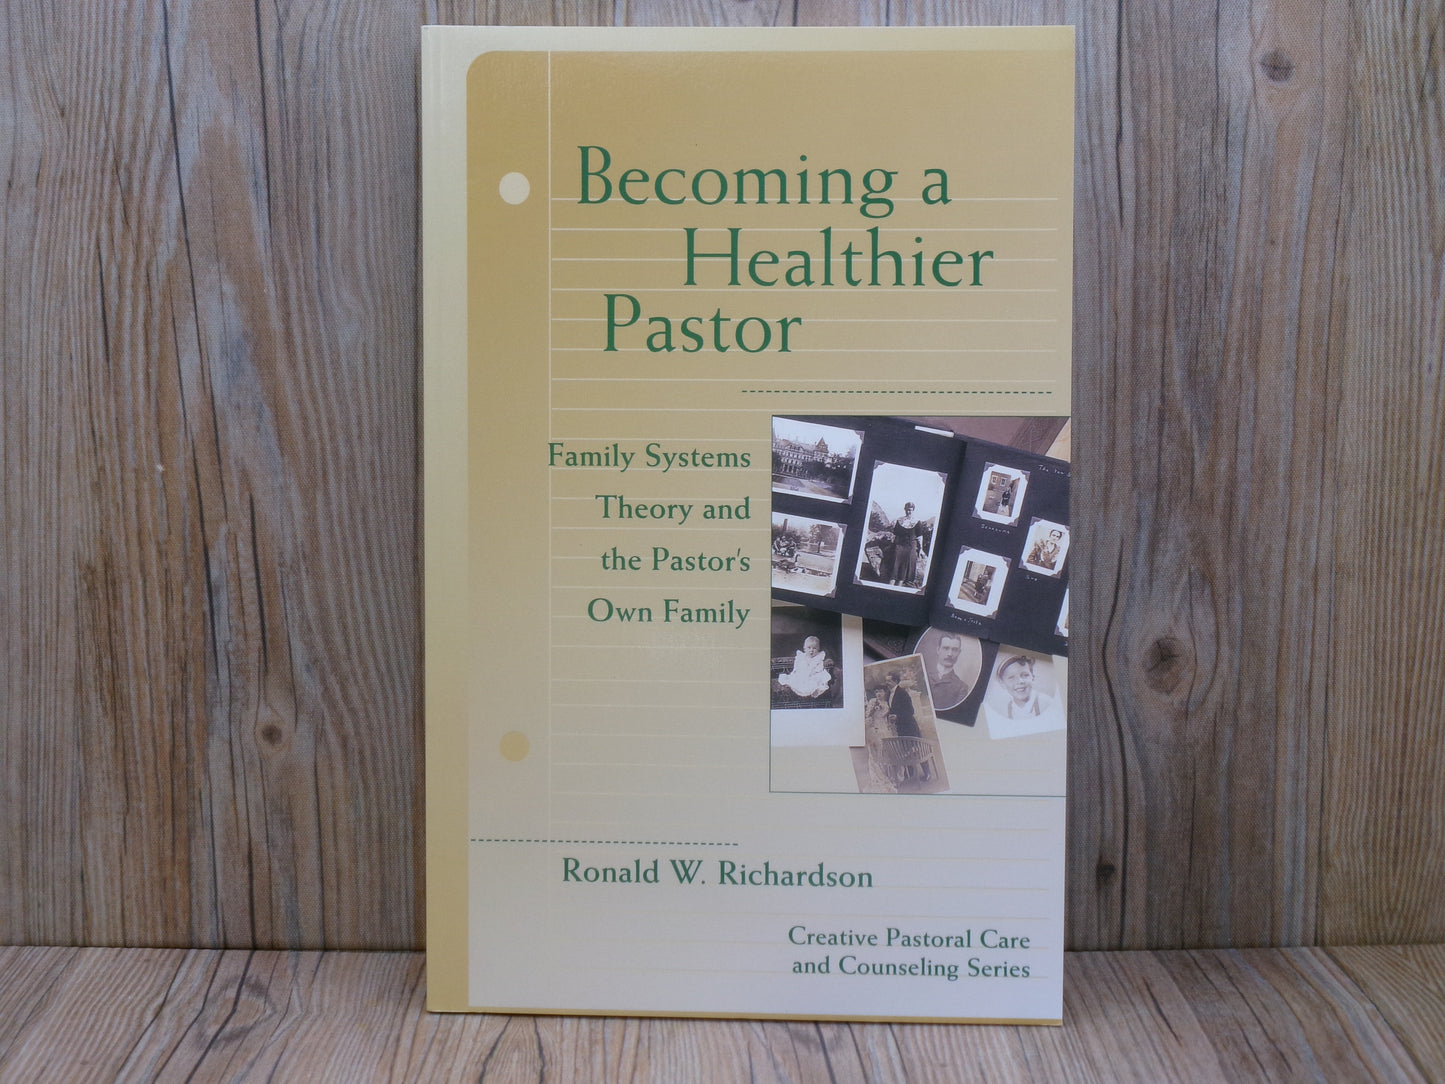 Becoming a Healthier Pastor by Ronald W. Richardson